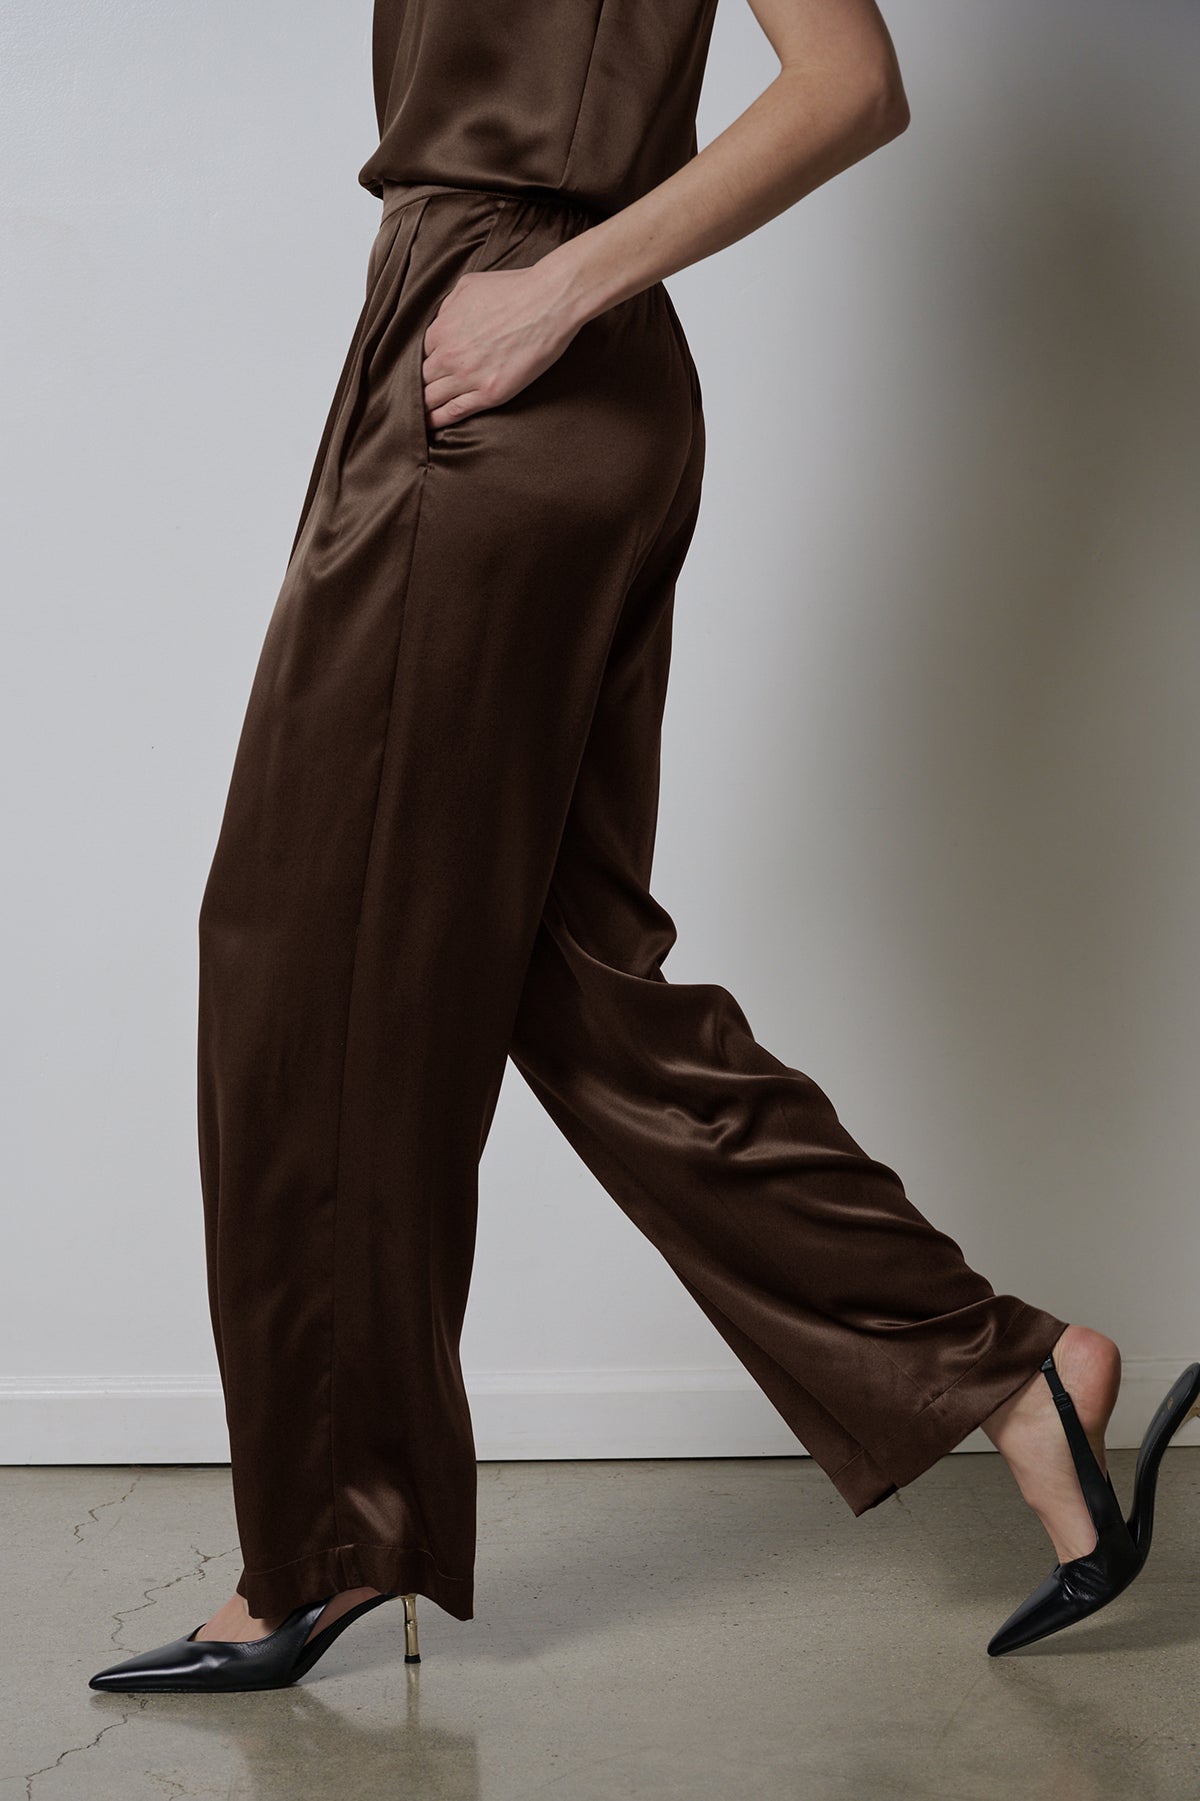   The model is wearing a brown silk Manhattan pant by Velvet by Jenny Graham. 